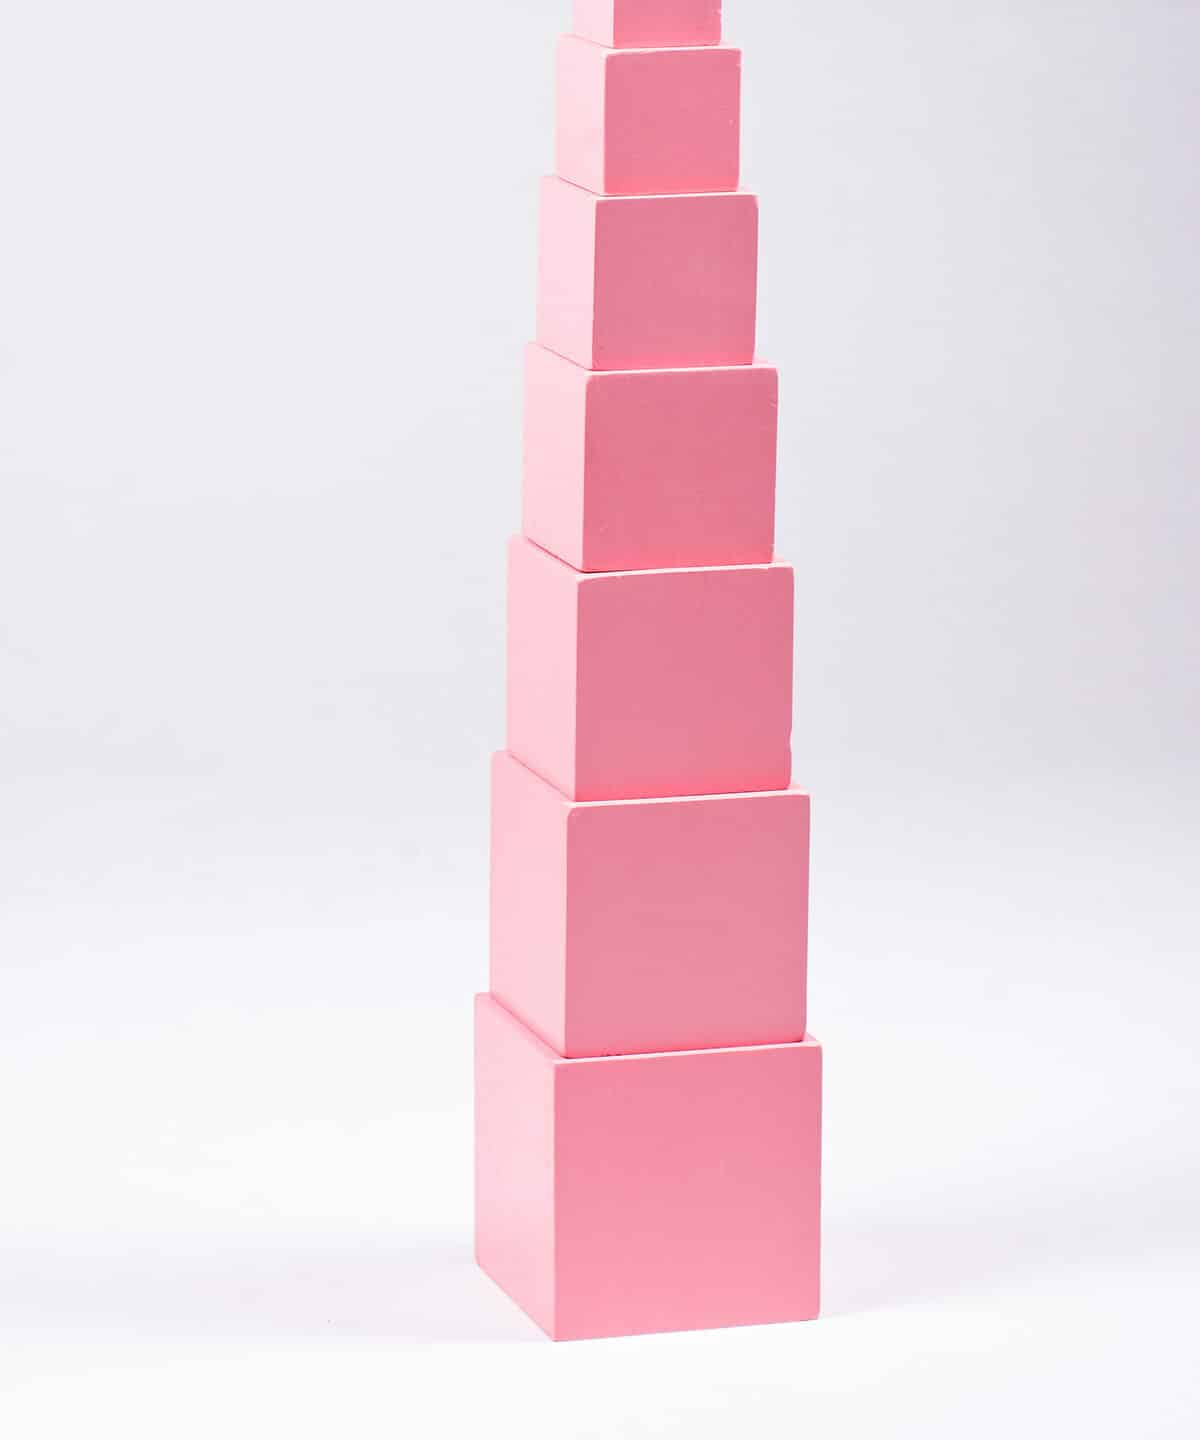 A photograph of the Montessori pink tower. The pink tower consists of 10 graduated blocks that are all painted pink. In the photograph the tower is set up with the largest block on the bottom and the smallest block on the top. It is in the center of the frame. The background is white isolate.